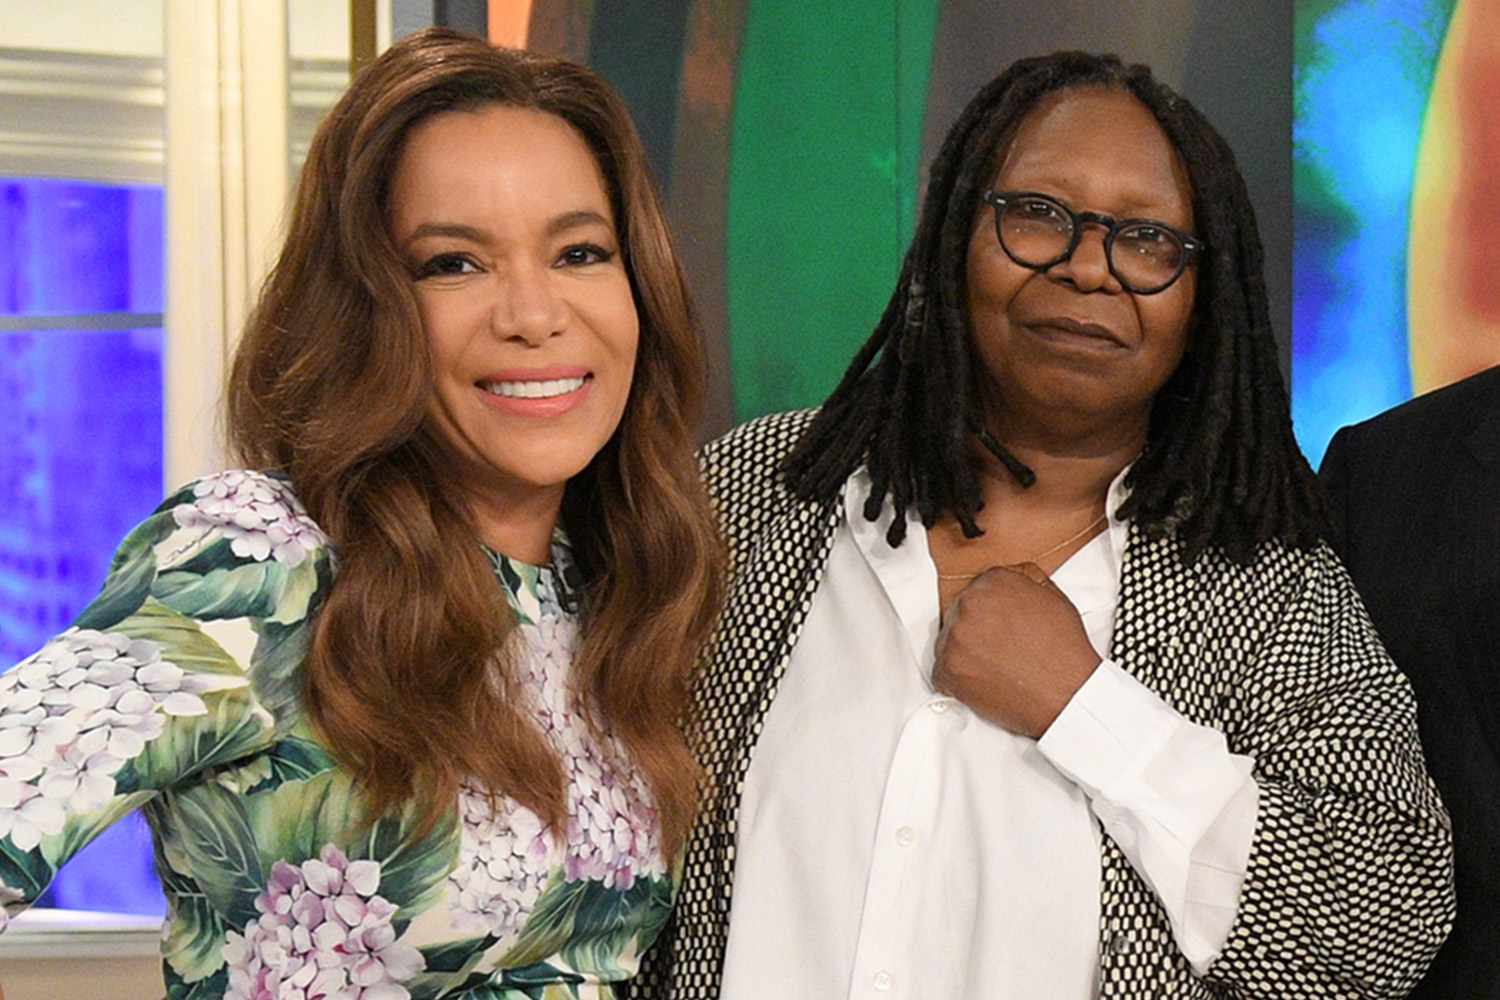 Sunny Hostin and Whoopi Goldberg on 'The View'